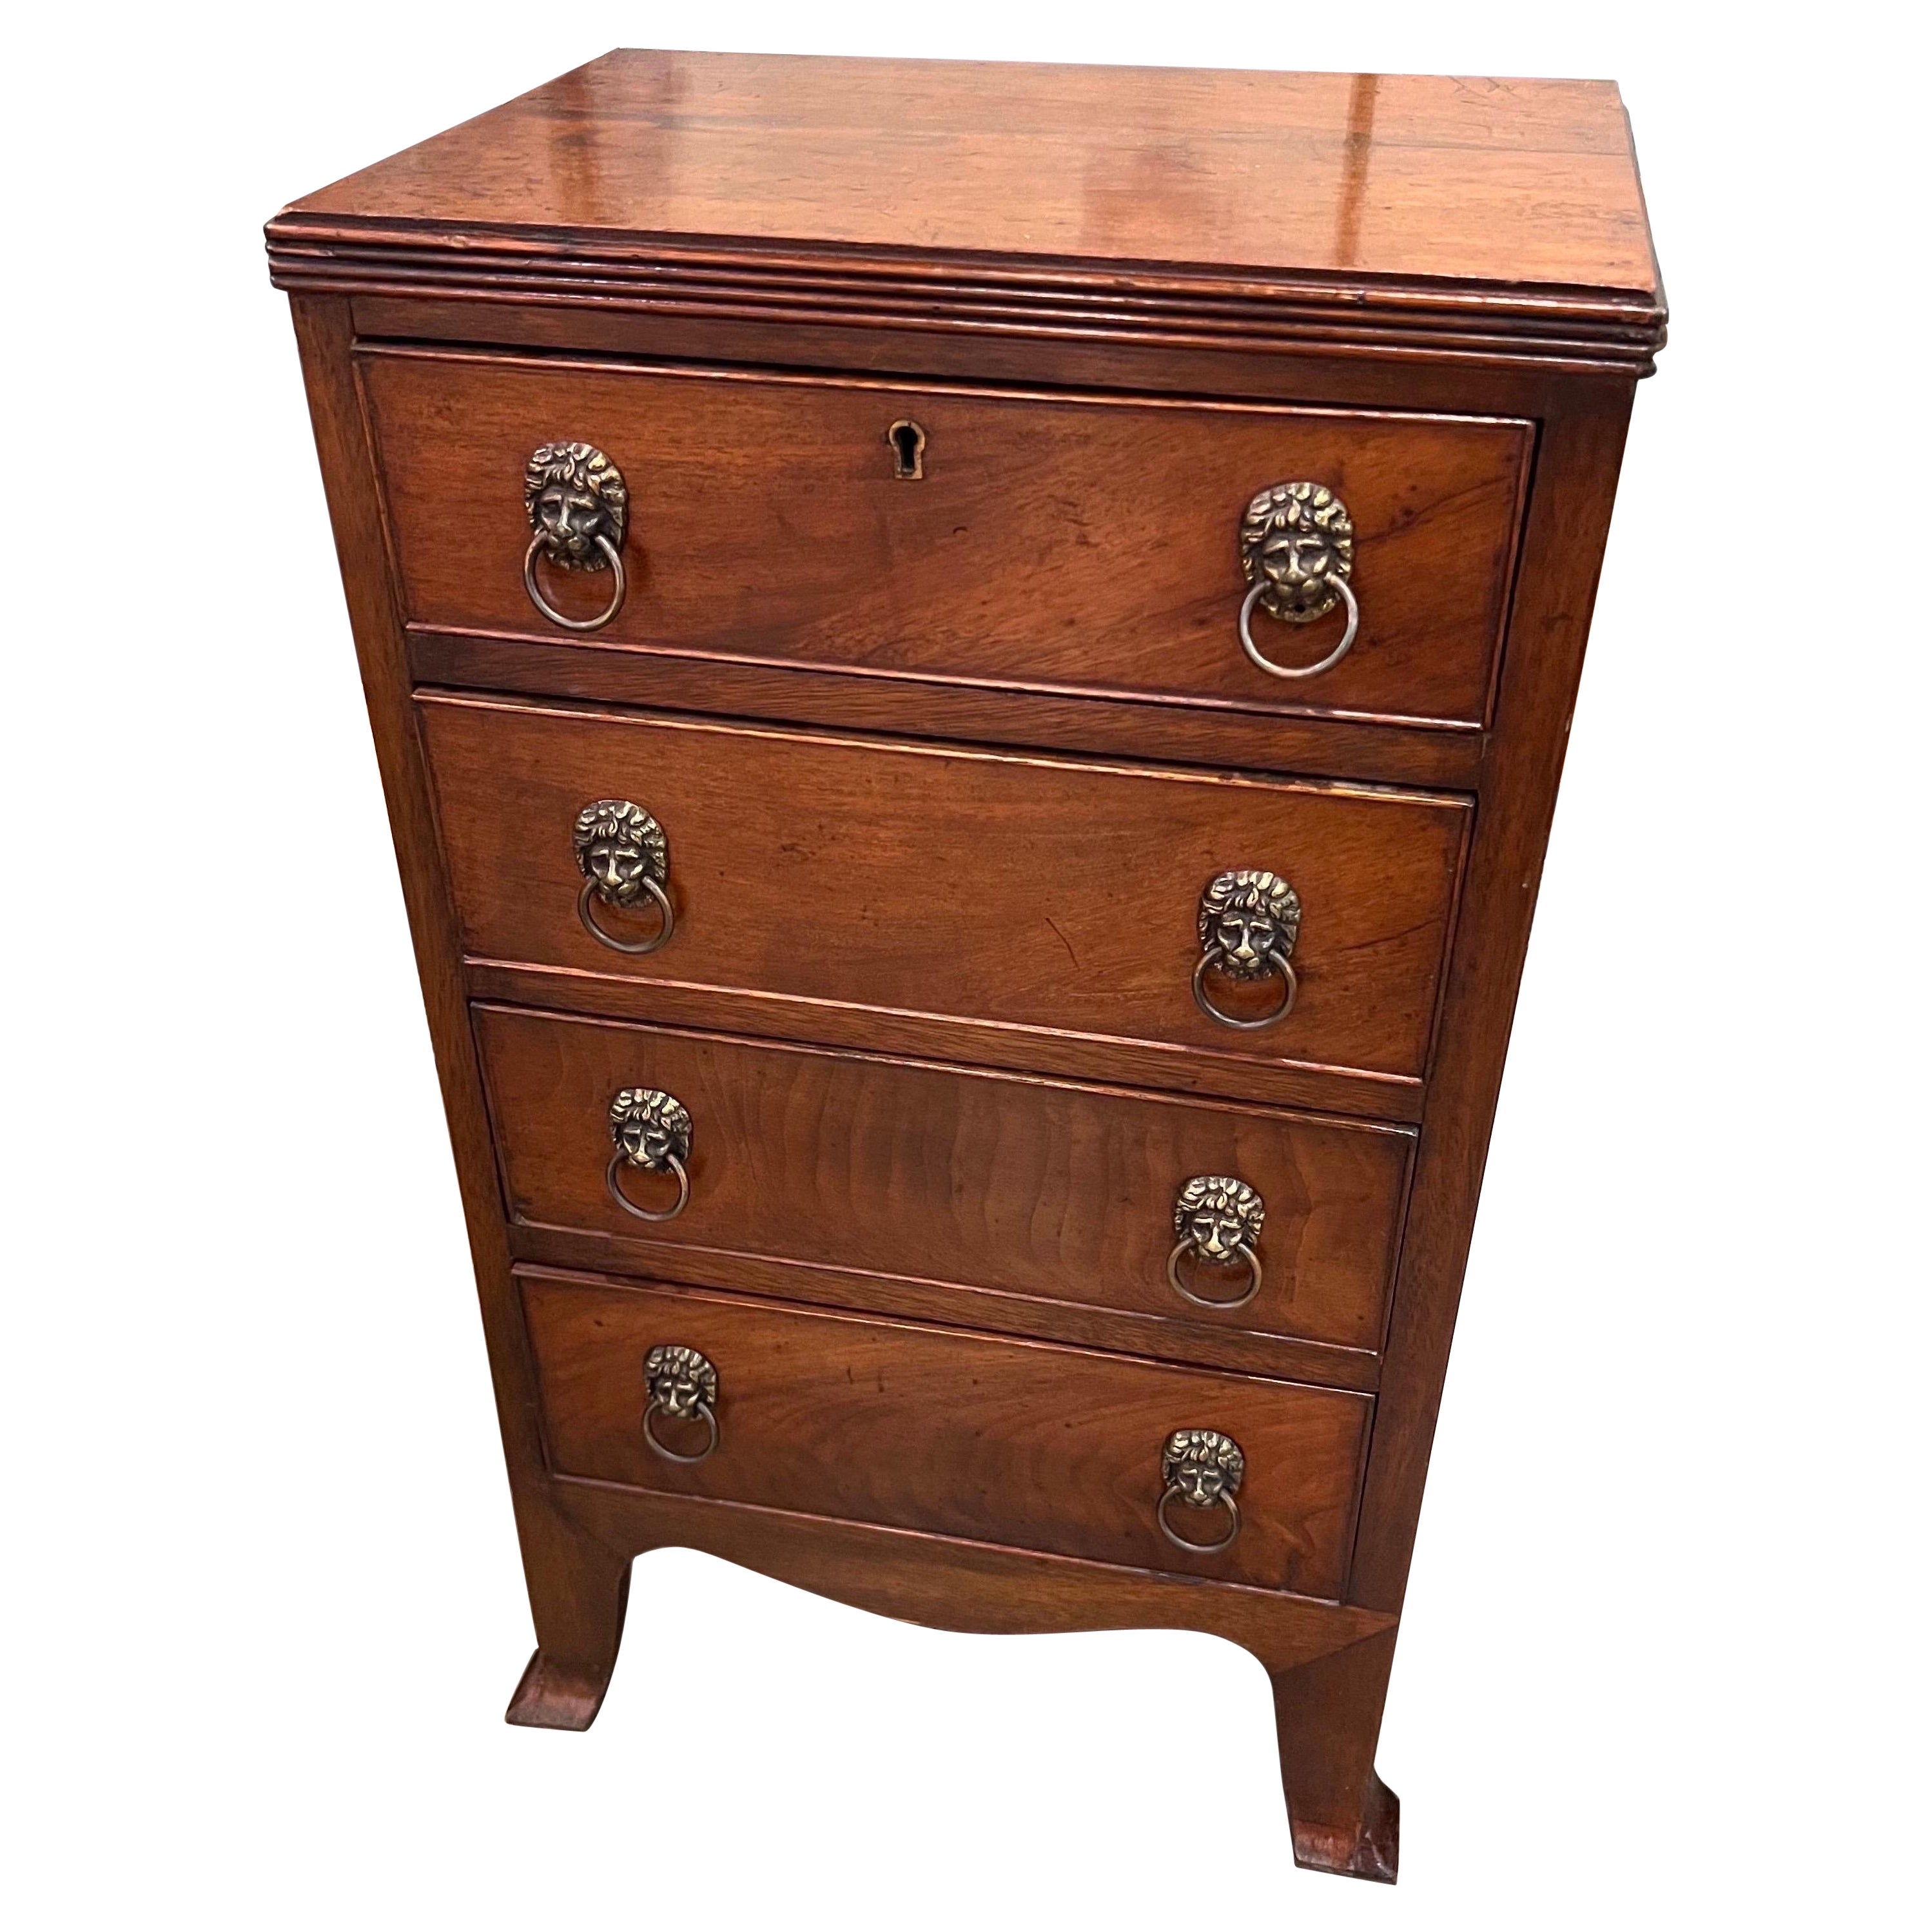 19th Century, Georgian Bedside Chest of Drawers